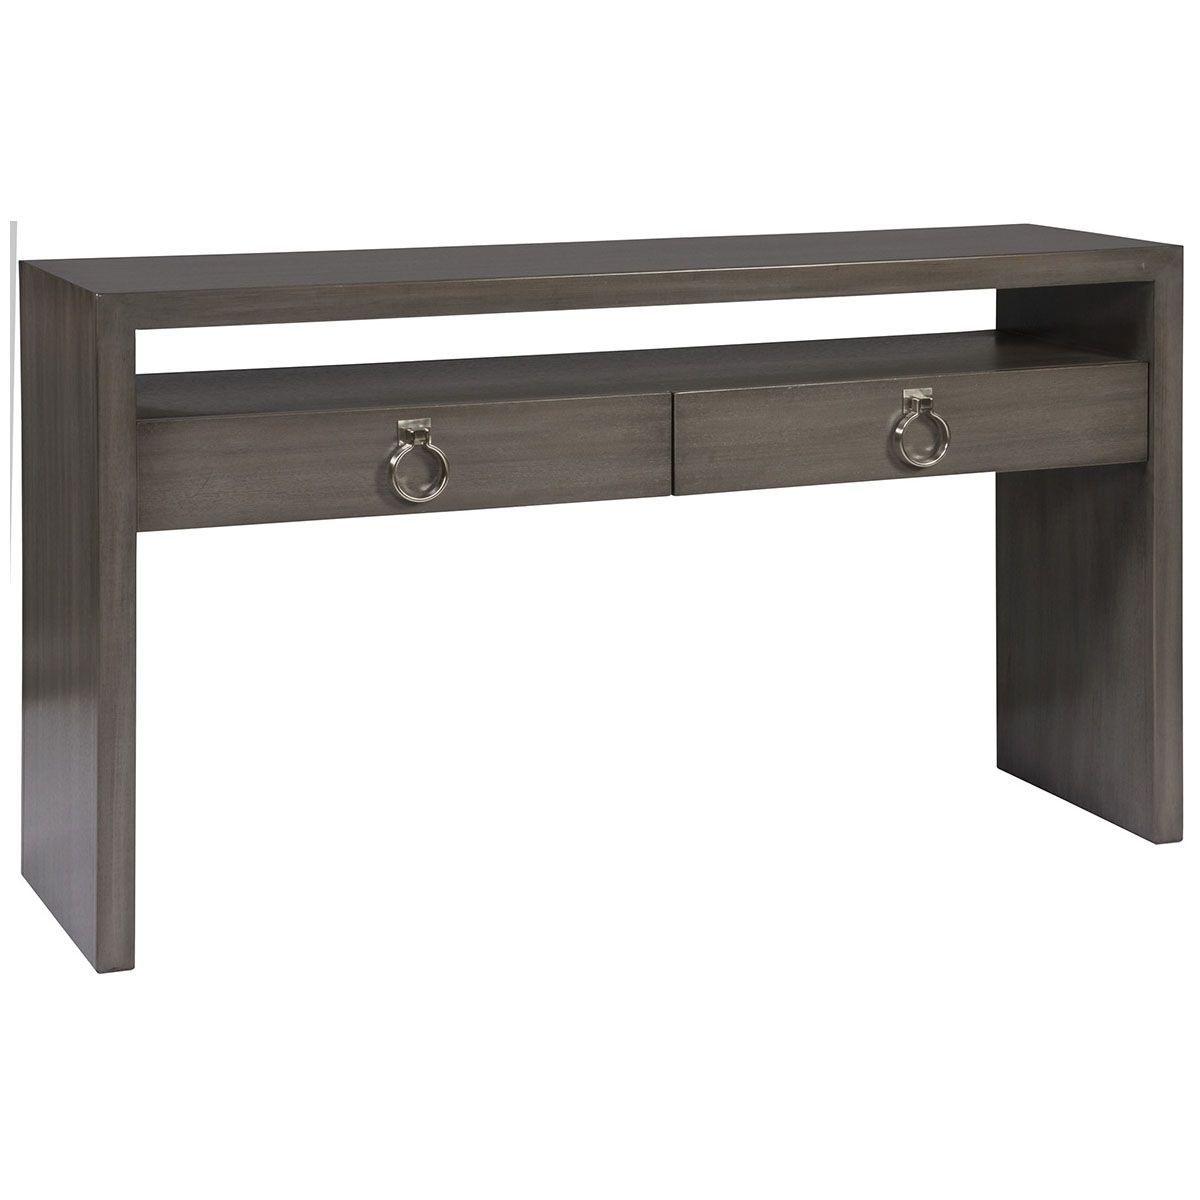 Vanguard Furniture Margo Console W349s Lg | Vanguad Furniture For Parsons Grey Marble Top &amp; Dark Steel Base 48x16 Console Tables (View 9 of 30)